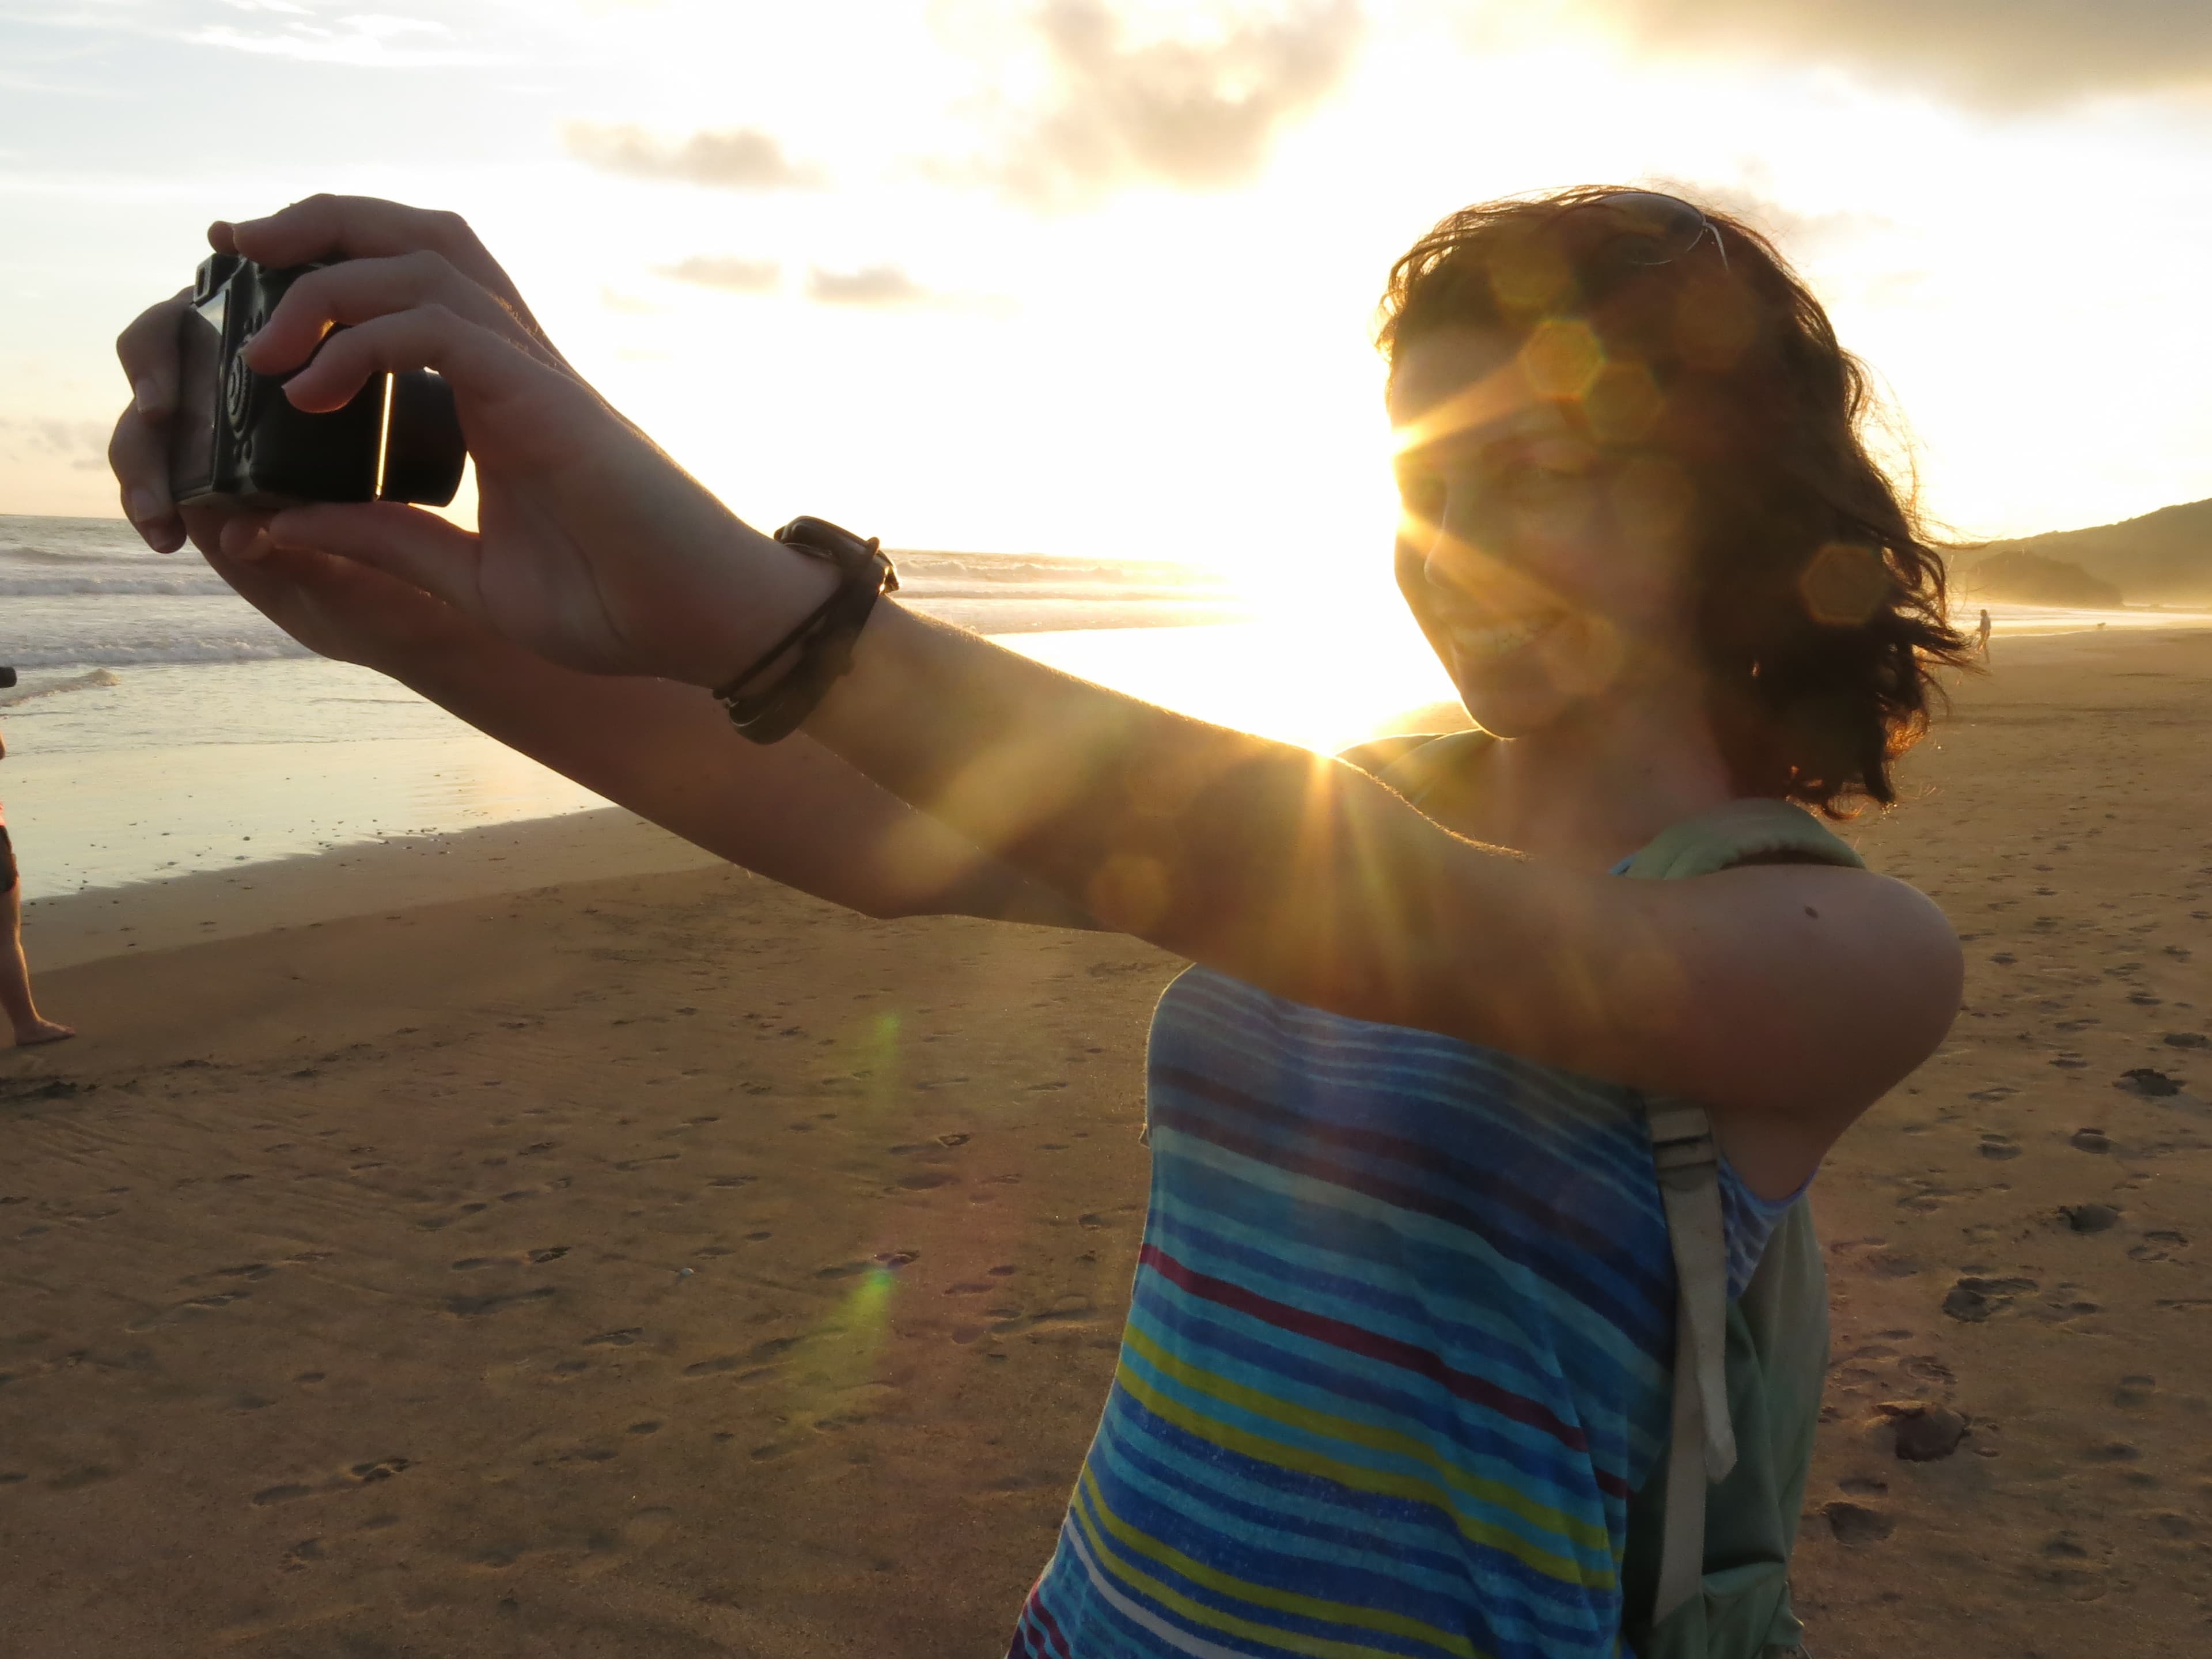 A solo traveler takes a photo of herself on the beach in Playa Grande, Costa Rica